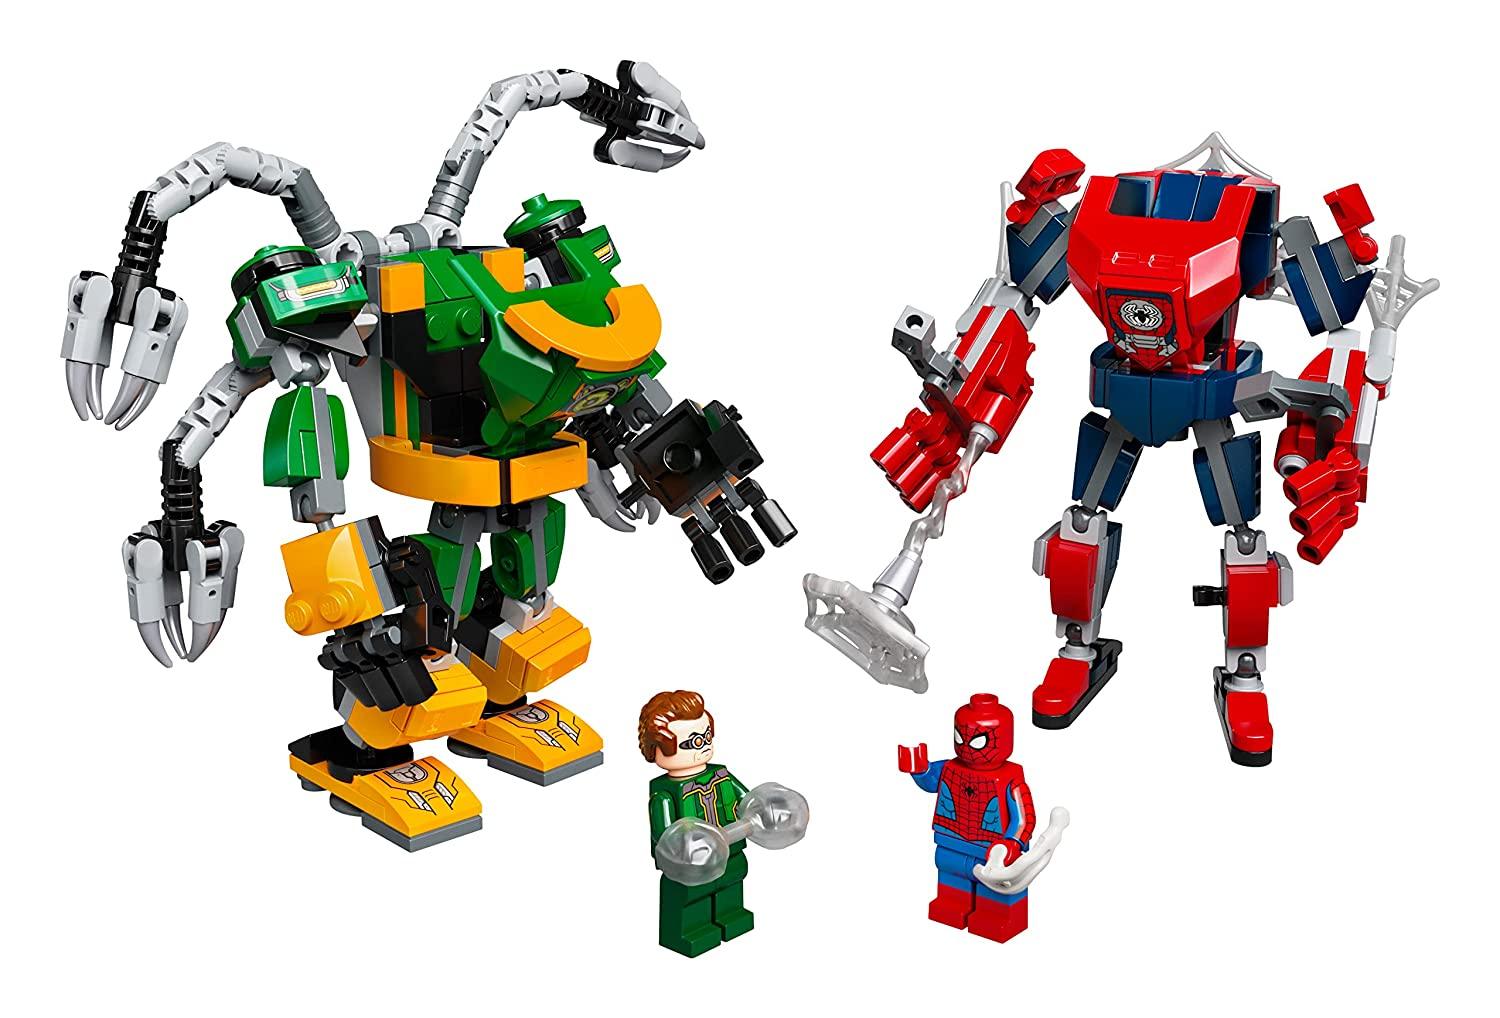 LEGO Marvel Spider-Man & Doctor Octopus Mech Battle Building Kit for Ages 7+ - FunCorp India